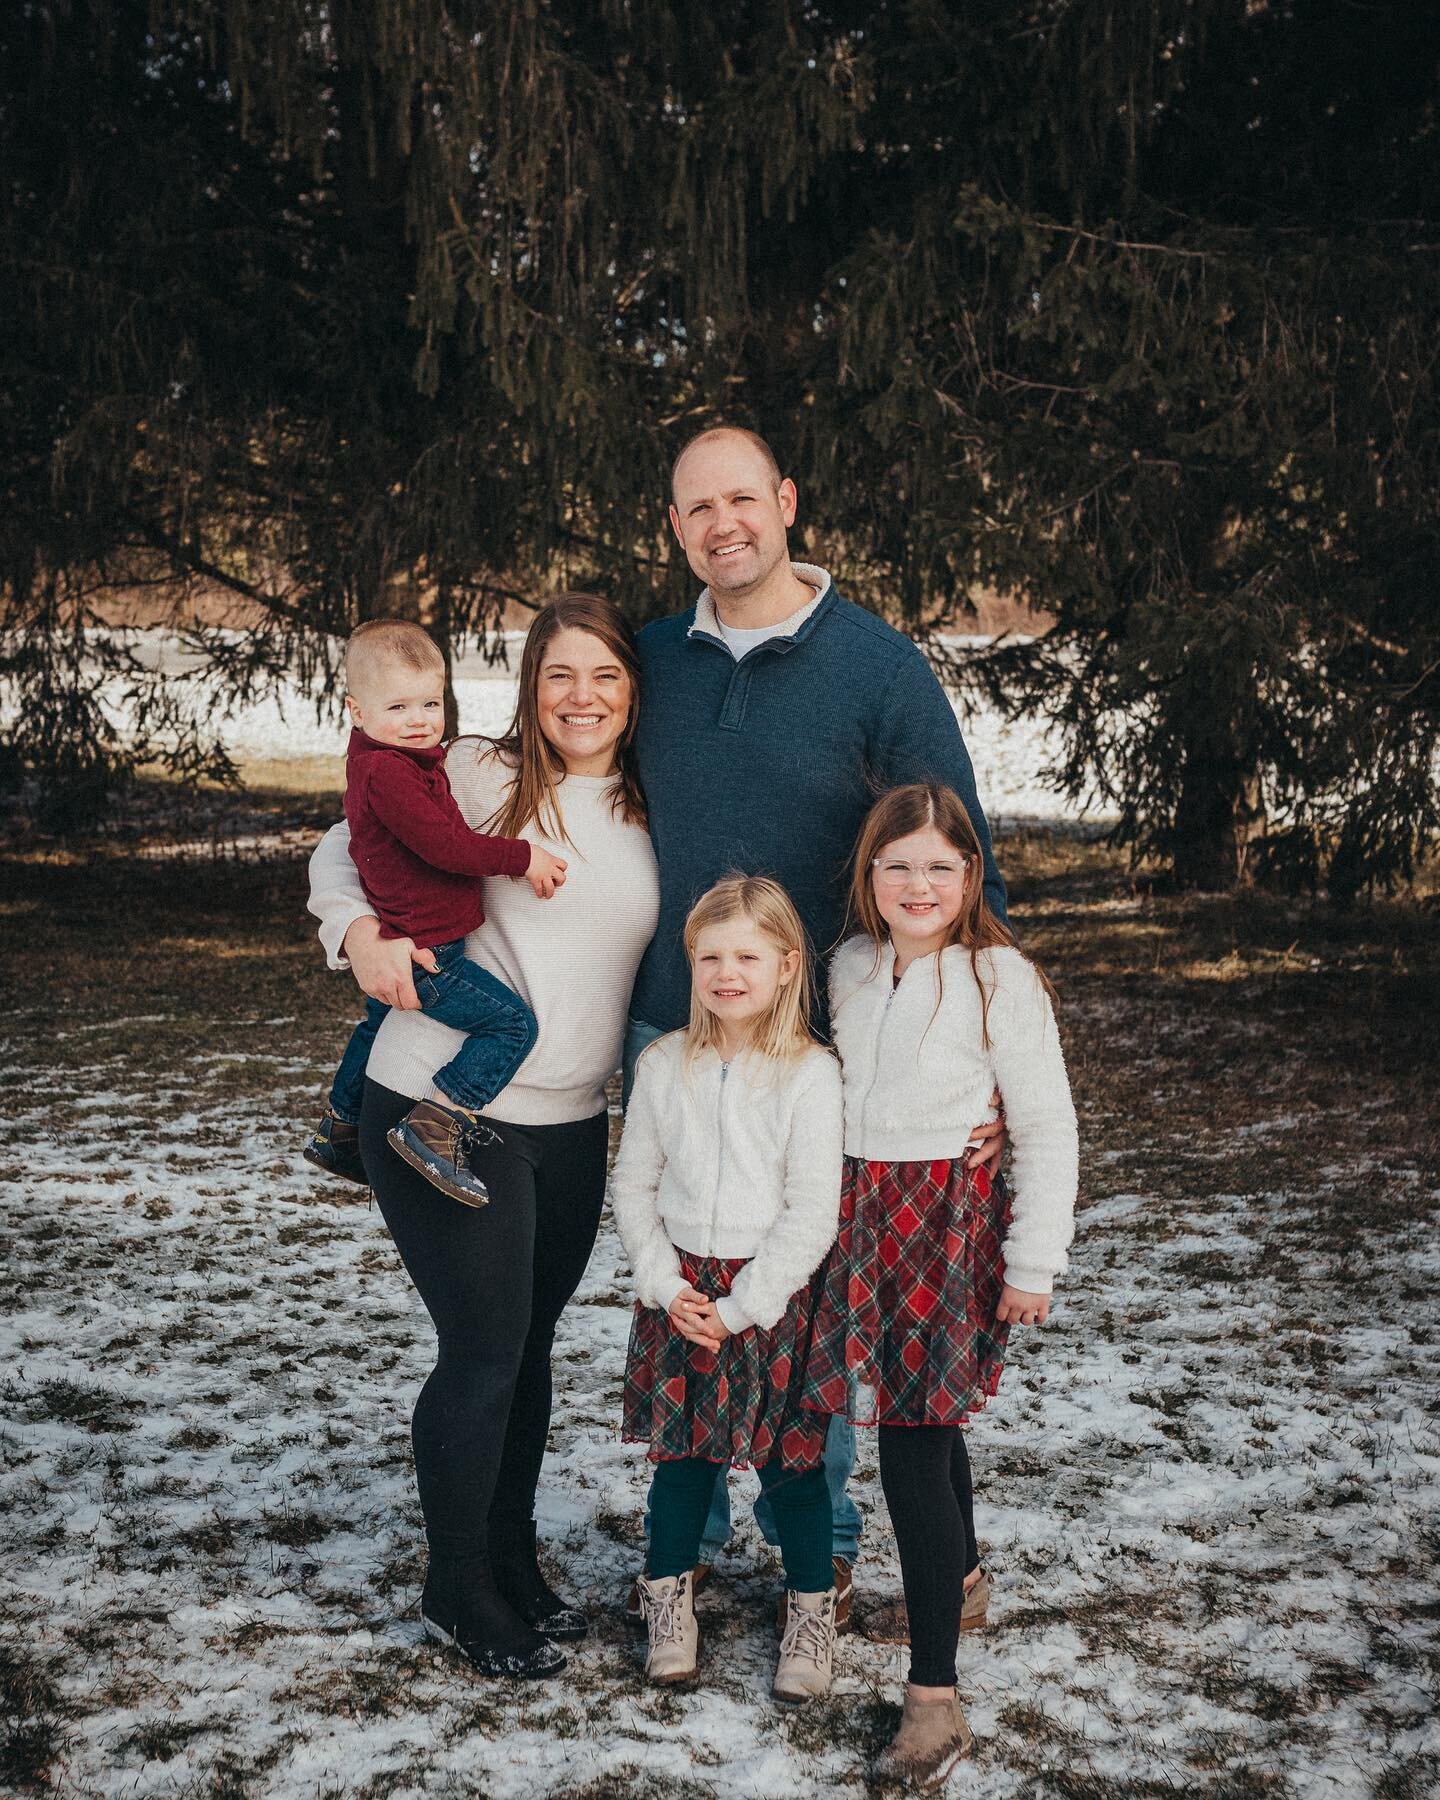 Merry Christmas and a joyous new year from our family to yours!🌲